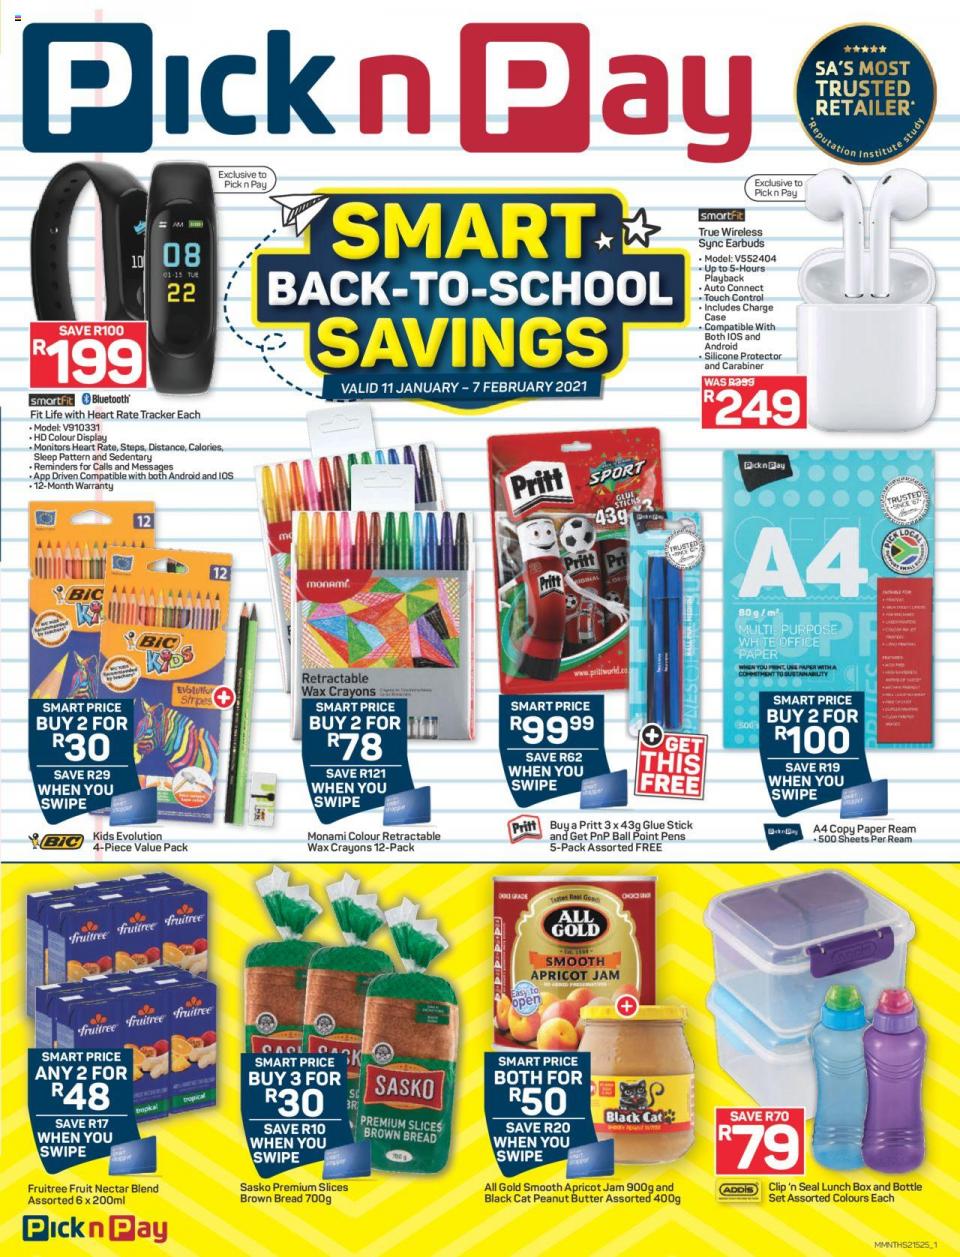 Pick n Pay Specials Back to School 11 January 2021